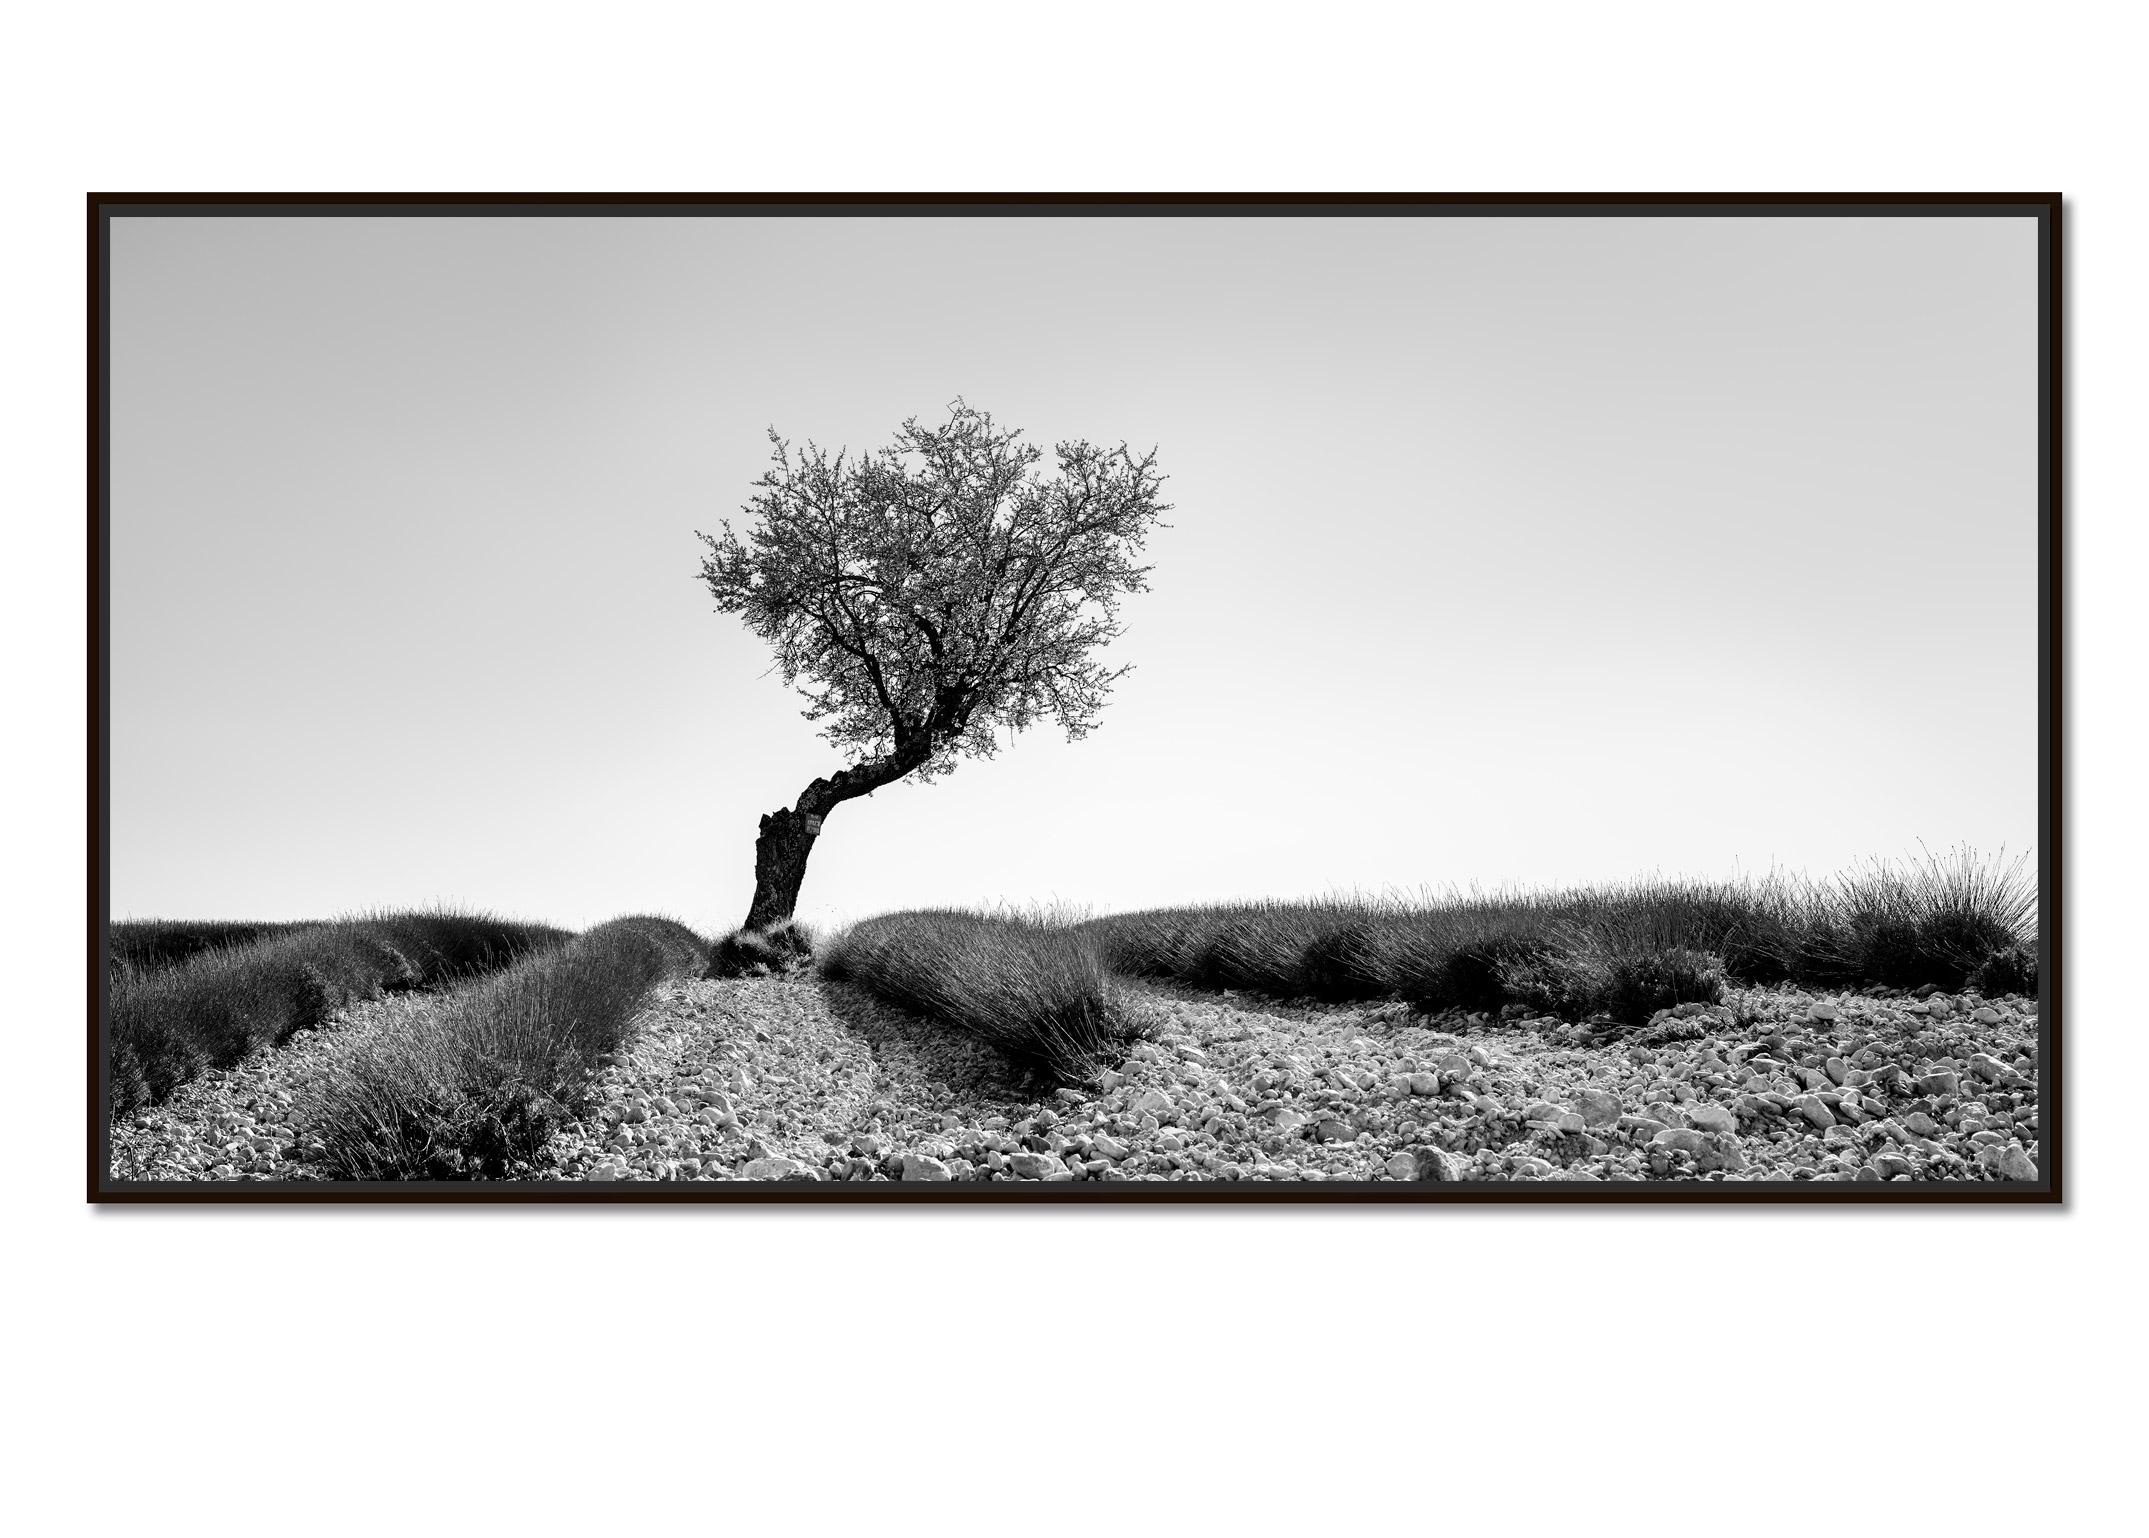 Tree in Lavender Field, Panorama, France, black white art landscape photography - Photograph by Gerald Berghammer